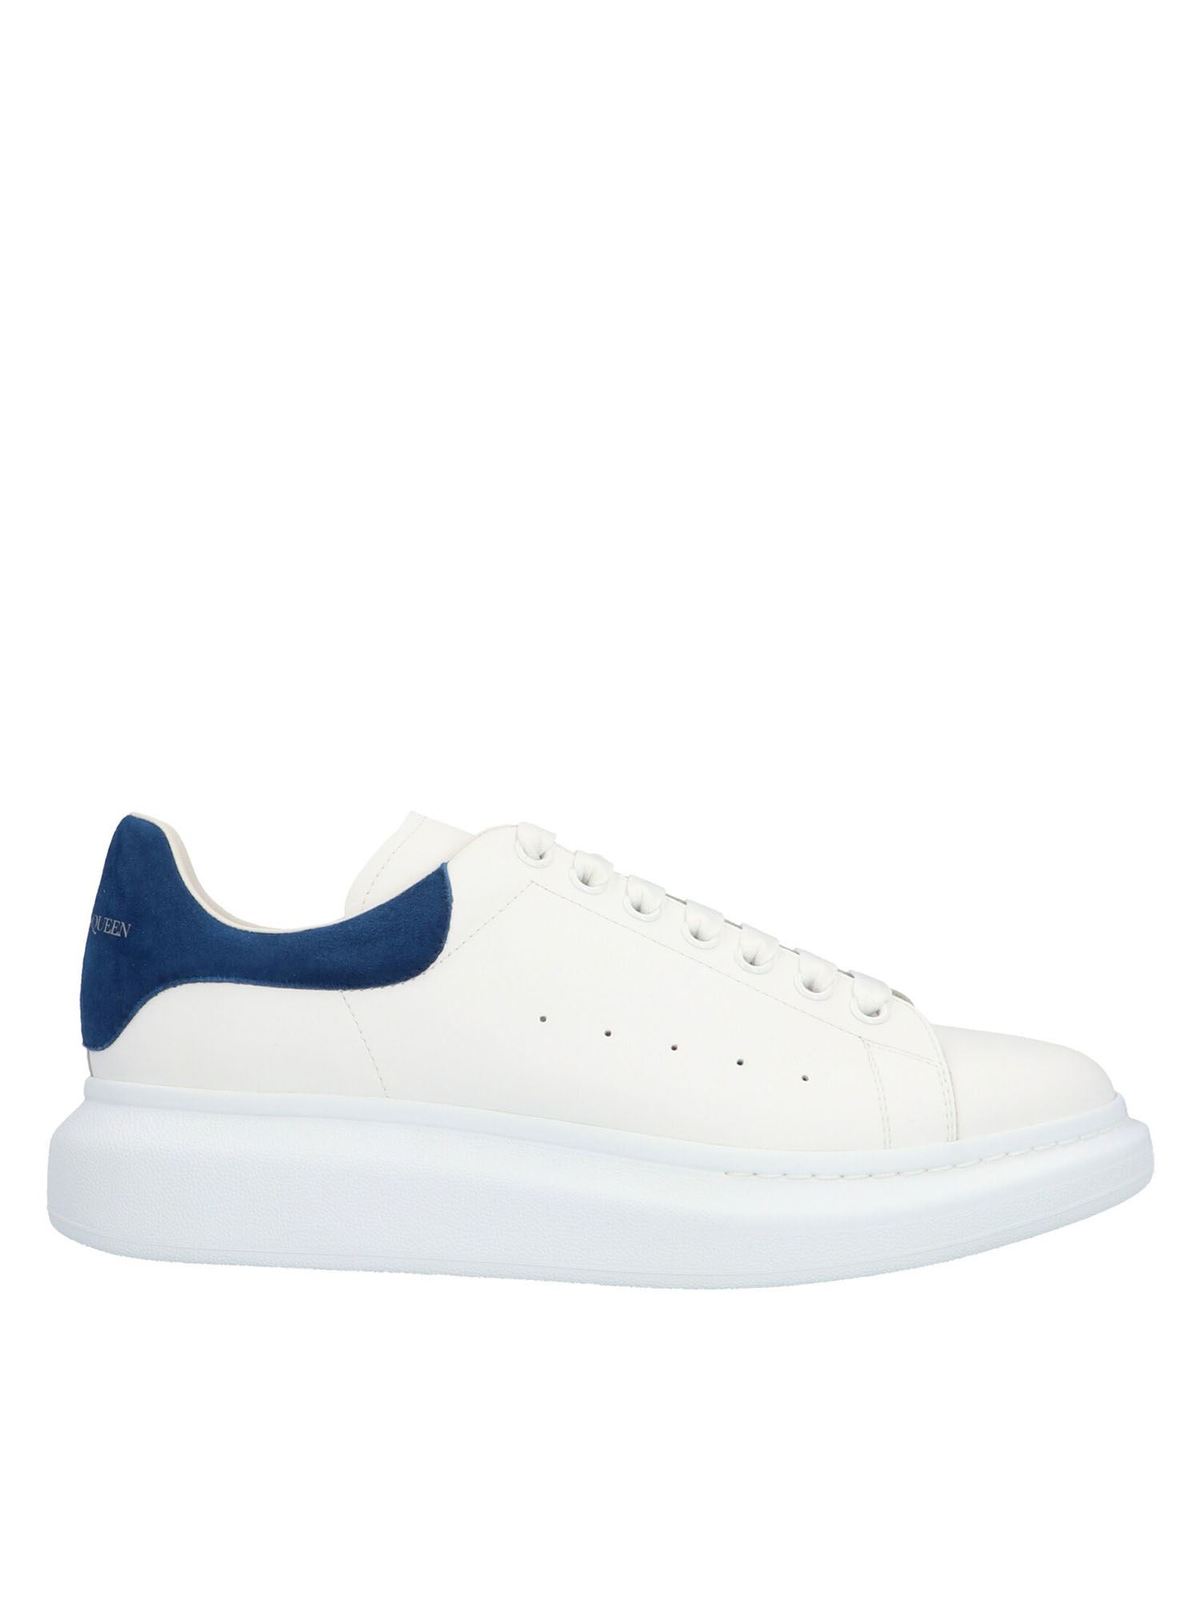 Alexander Mcqueen Oversize Sneakers In White And Blue In Blanco